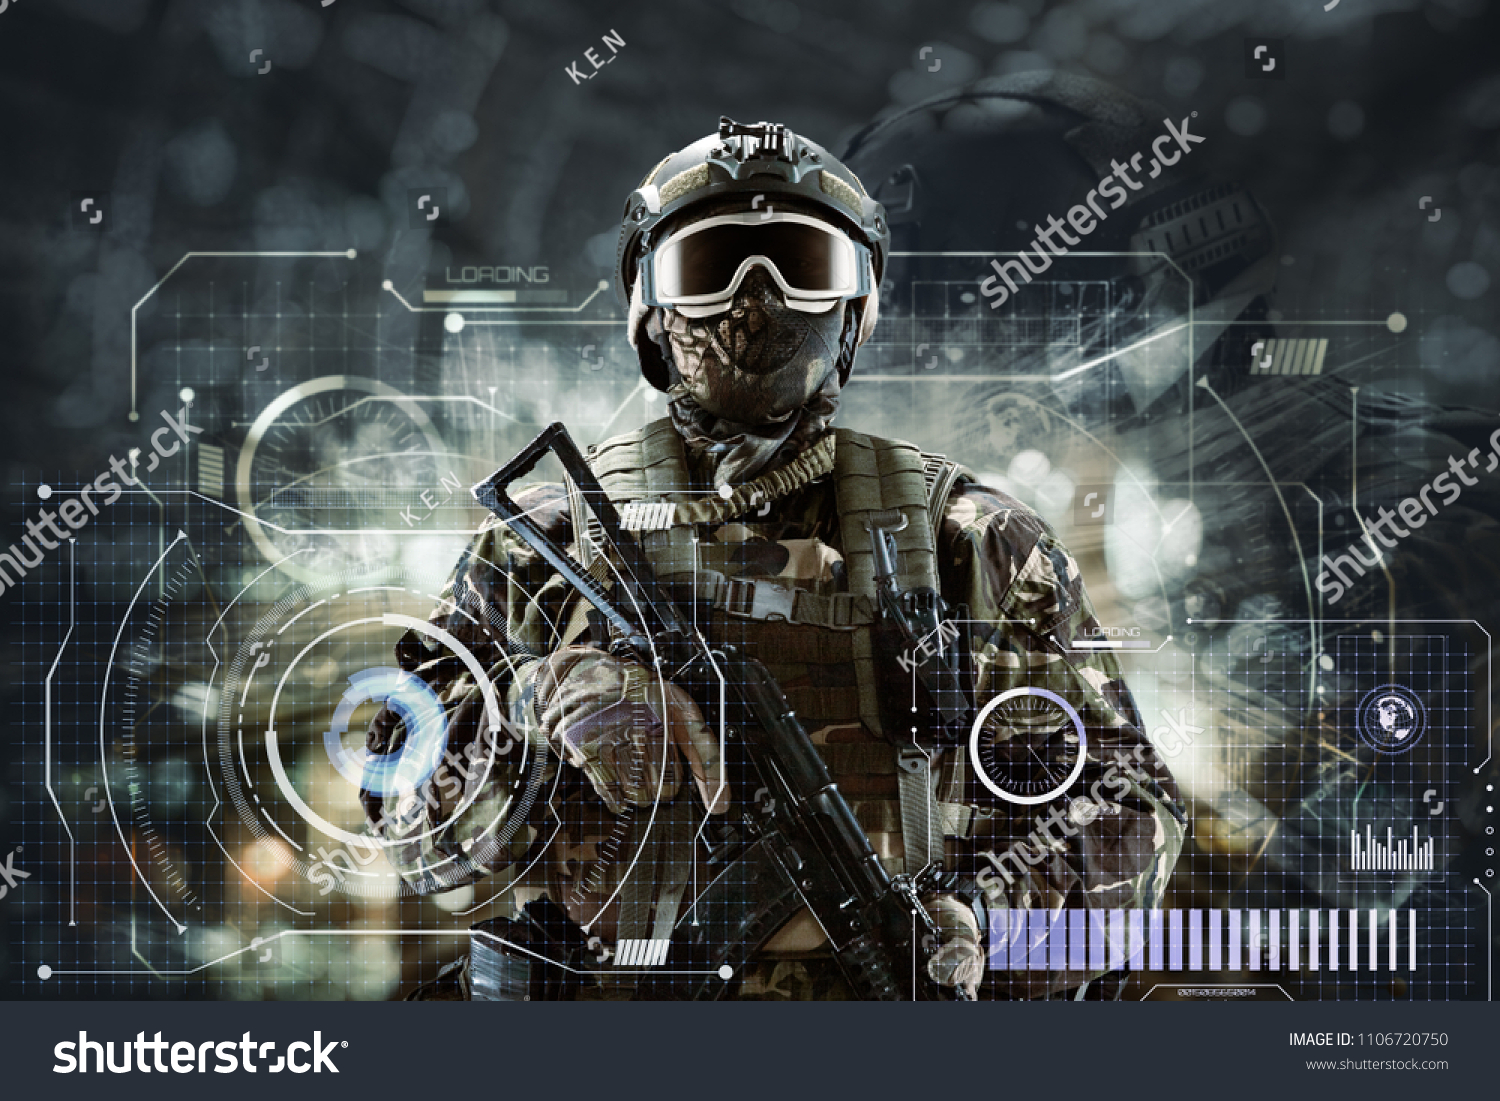 Soldier special forces in glasses with weapons in their hands on a futuristic background.  Military concept of the future. #1106720750